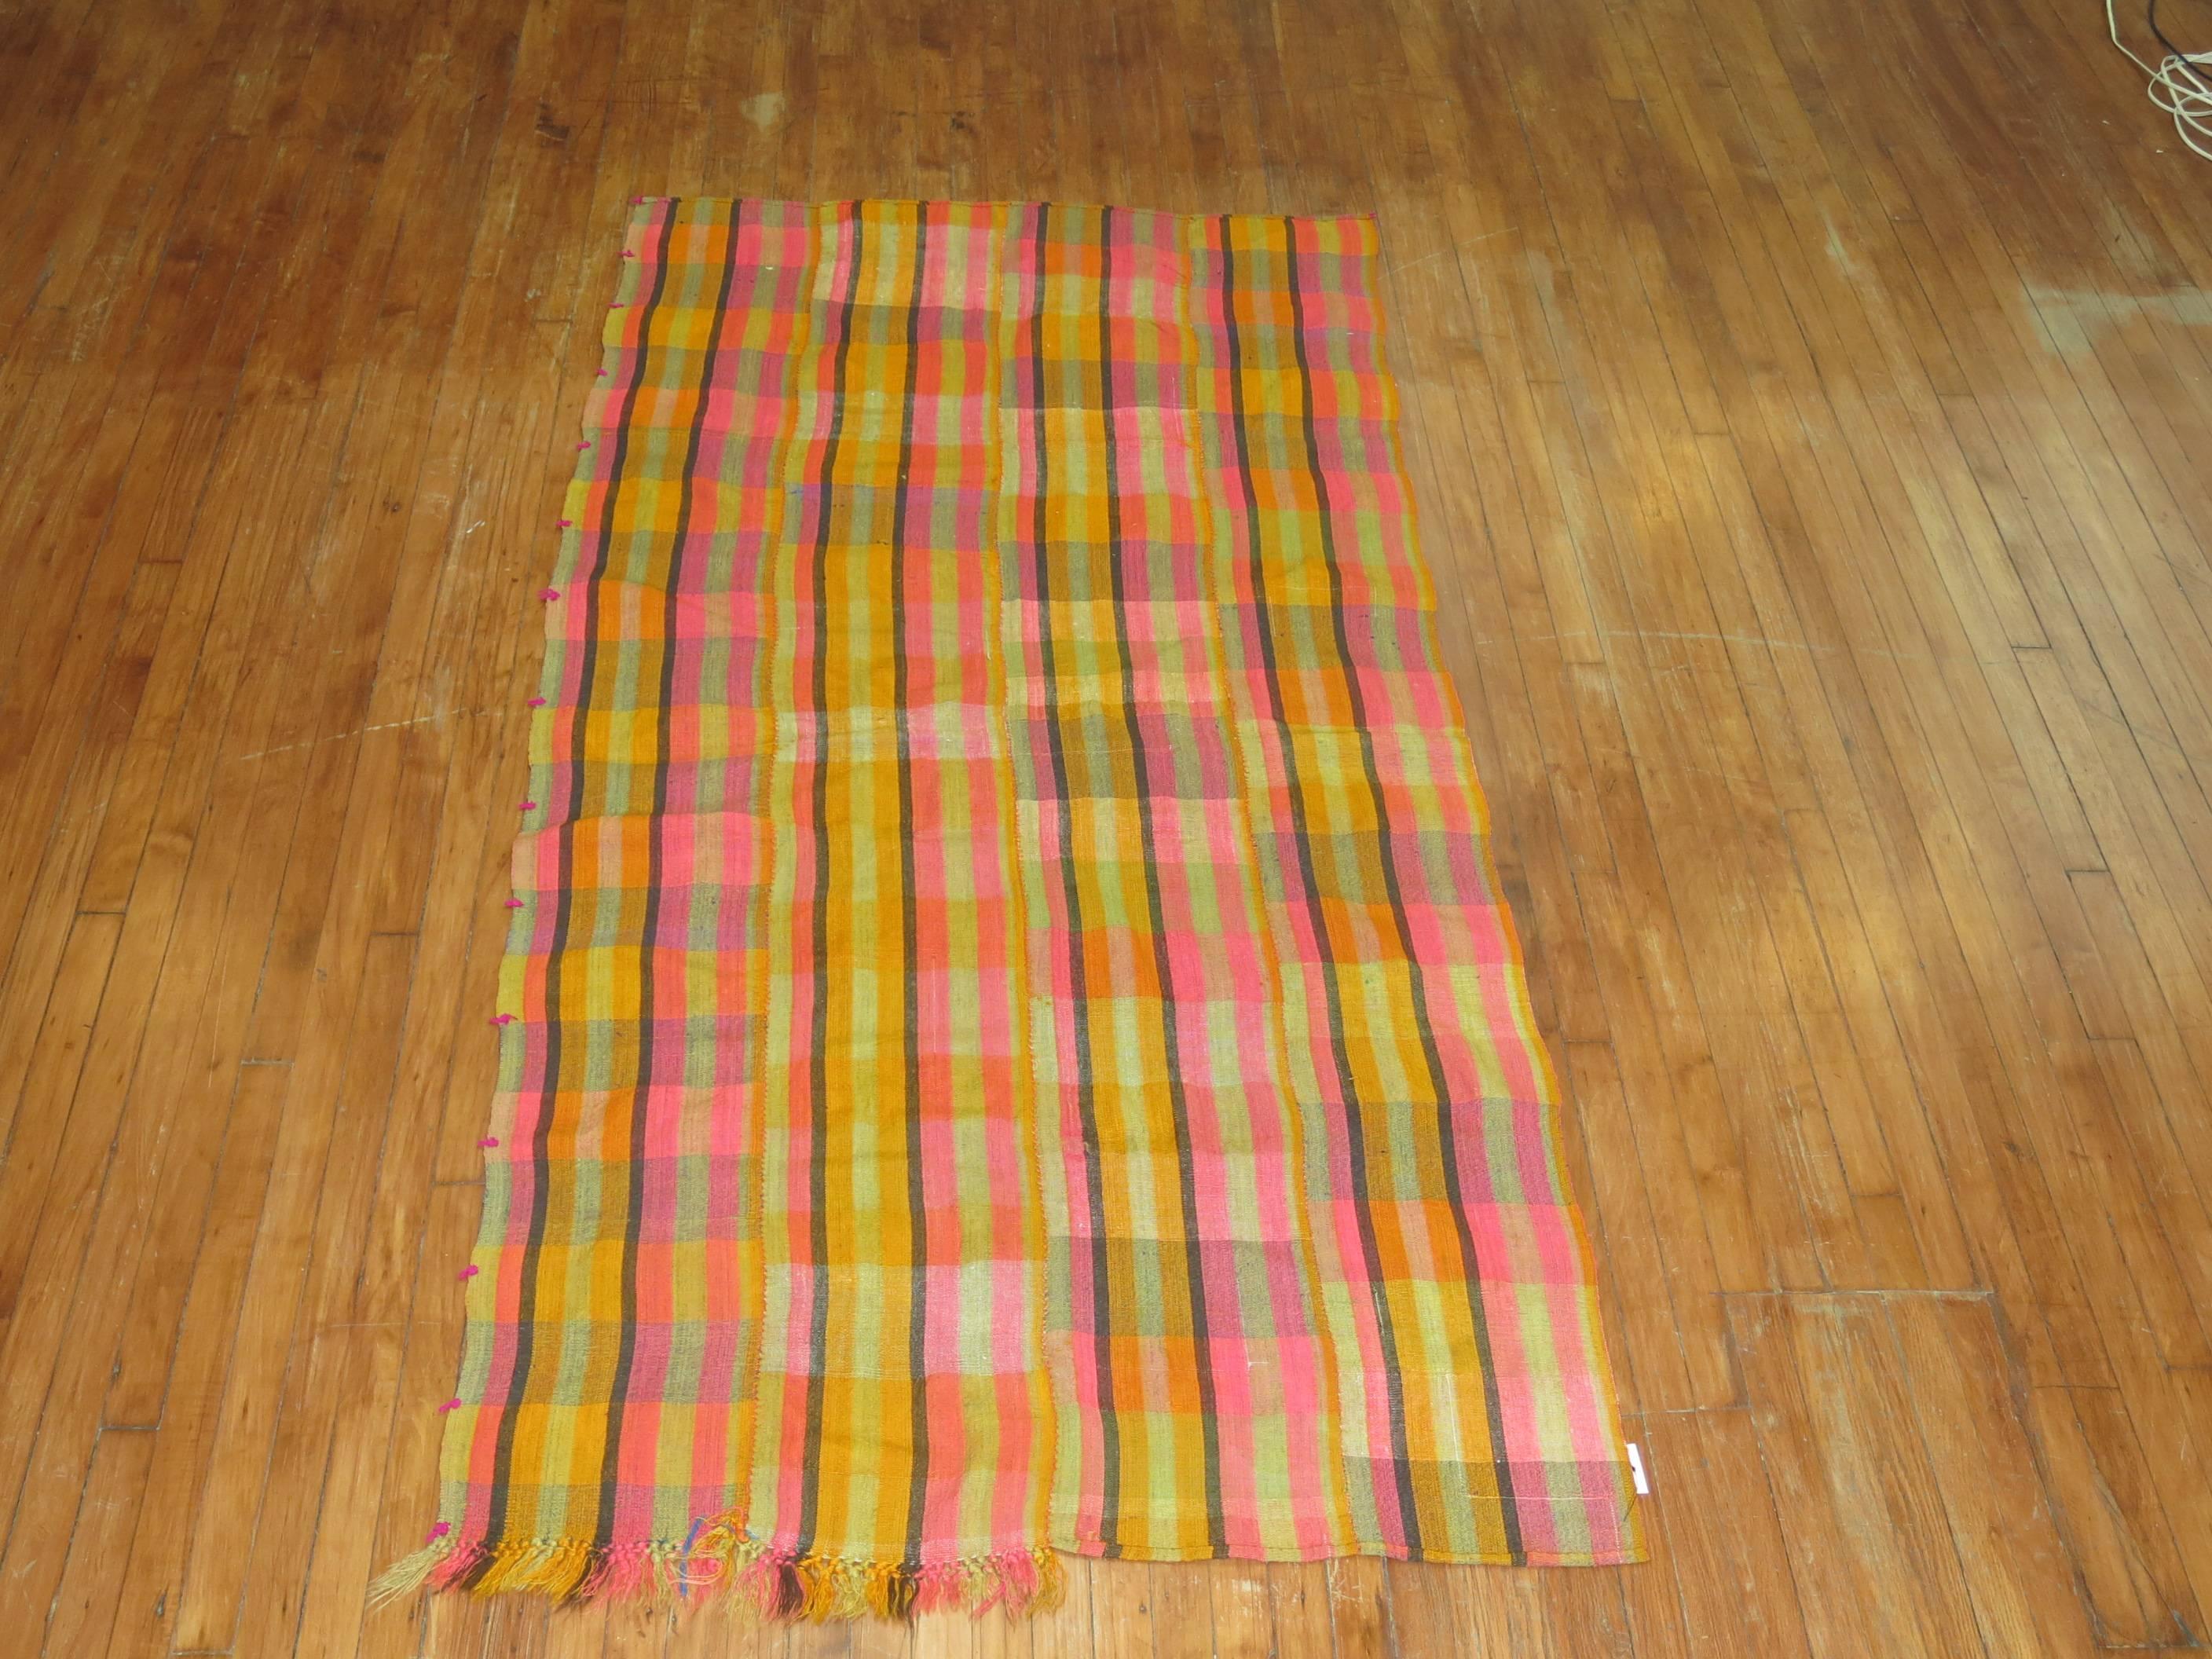 Colorful Turkish textile that can be used as a floor covering or throw.